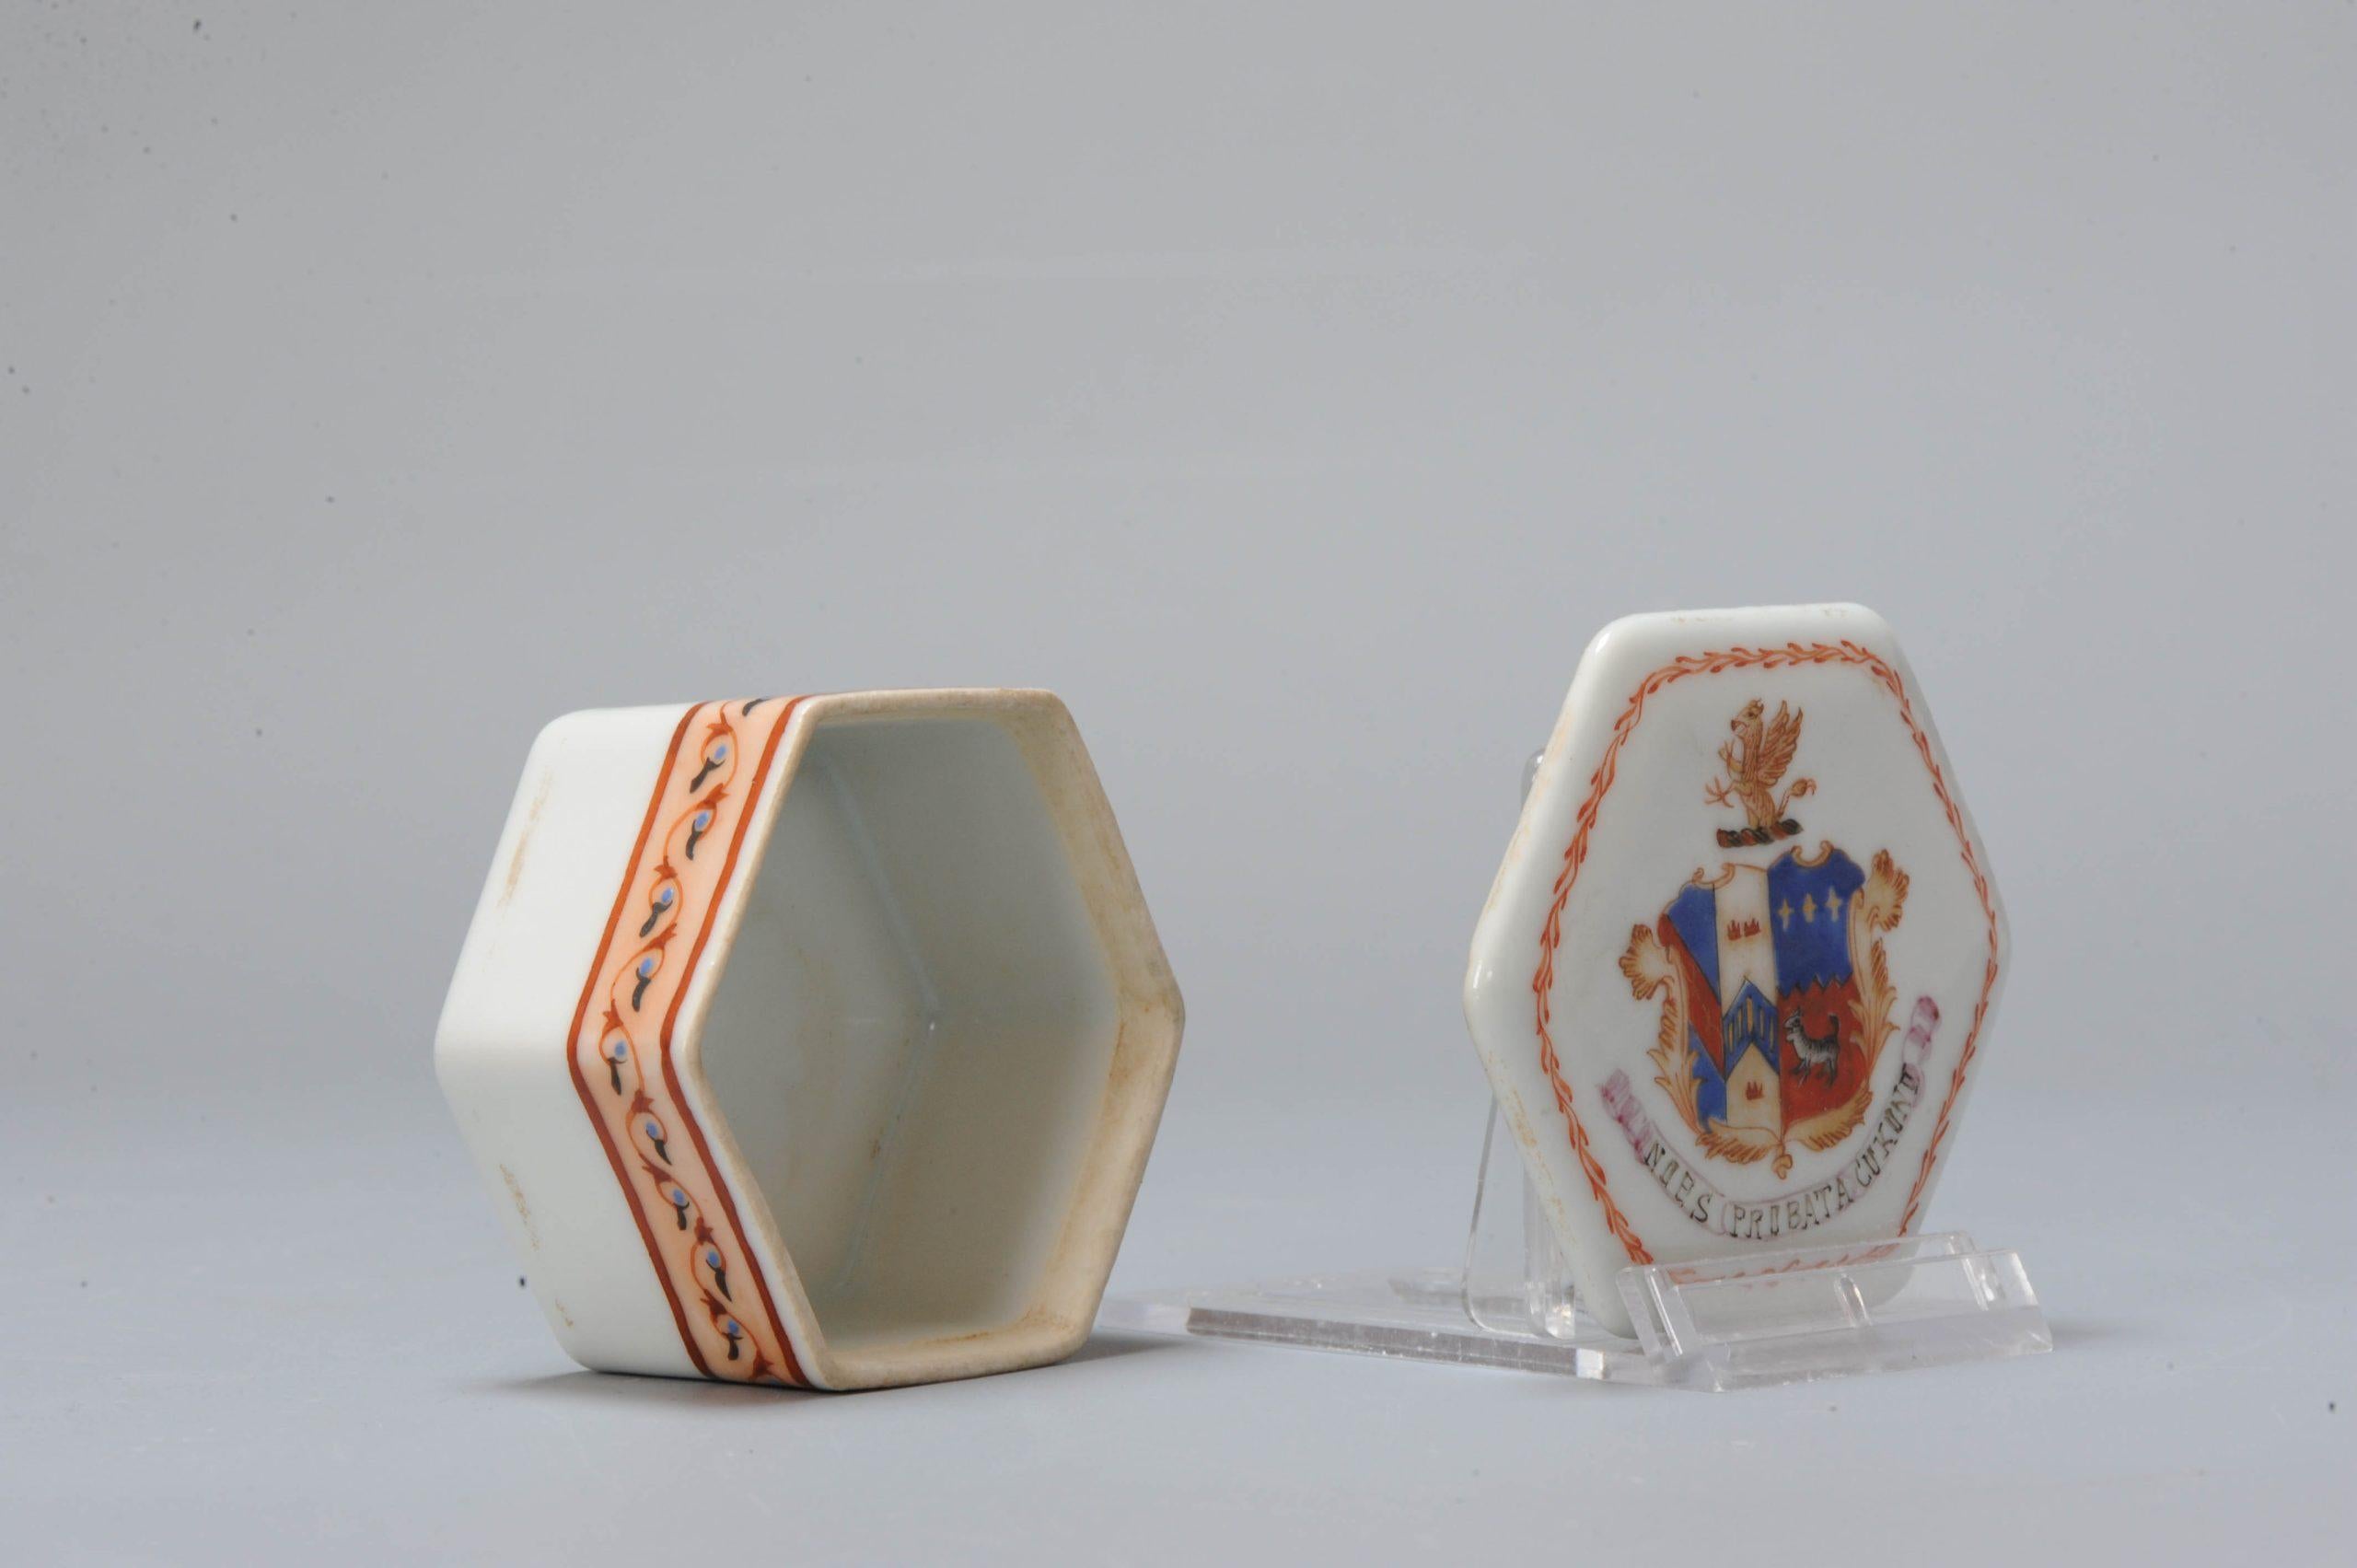 Nicely shaped and sized Armorial box. Family unknown.

Additional information:
Material: Porcelain & Pottery
Type: Tea/Coffee Drinking: Bowls, Cups & Teapots
Region of Origin: China
Emperor: Jiaqing (1796-1820), Qianlong (1735-1796)
Period: 18th